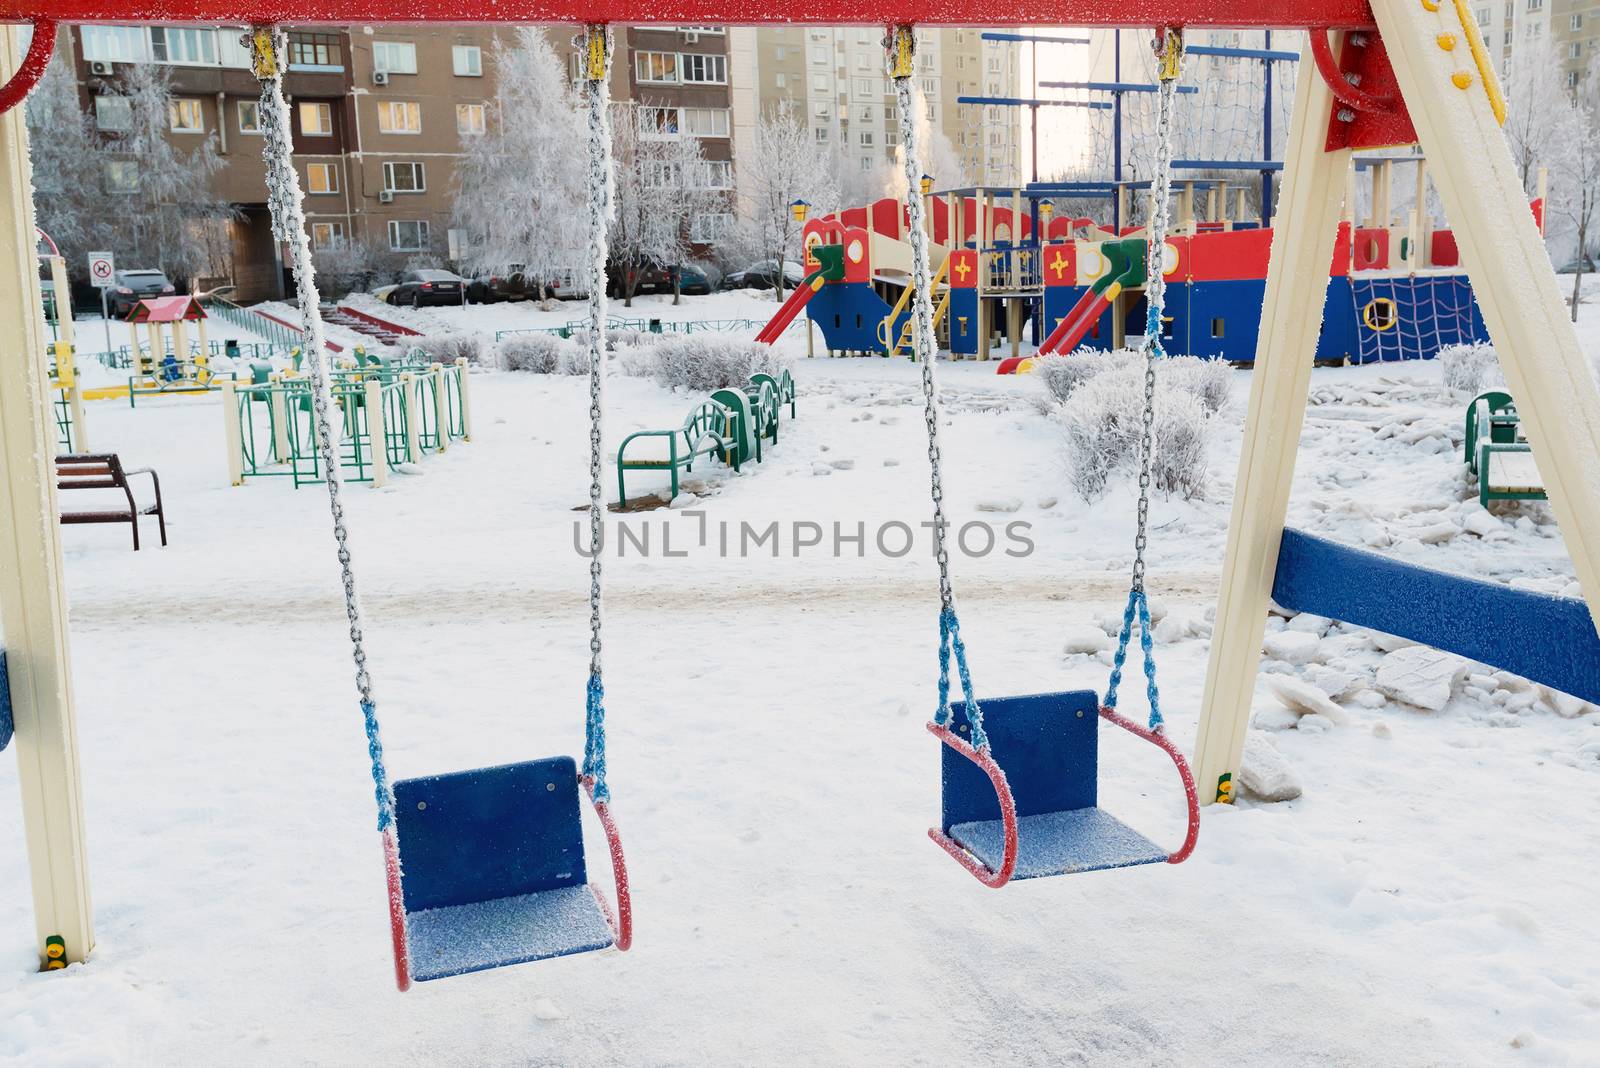 snow covered swing and slide at a playground in winter